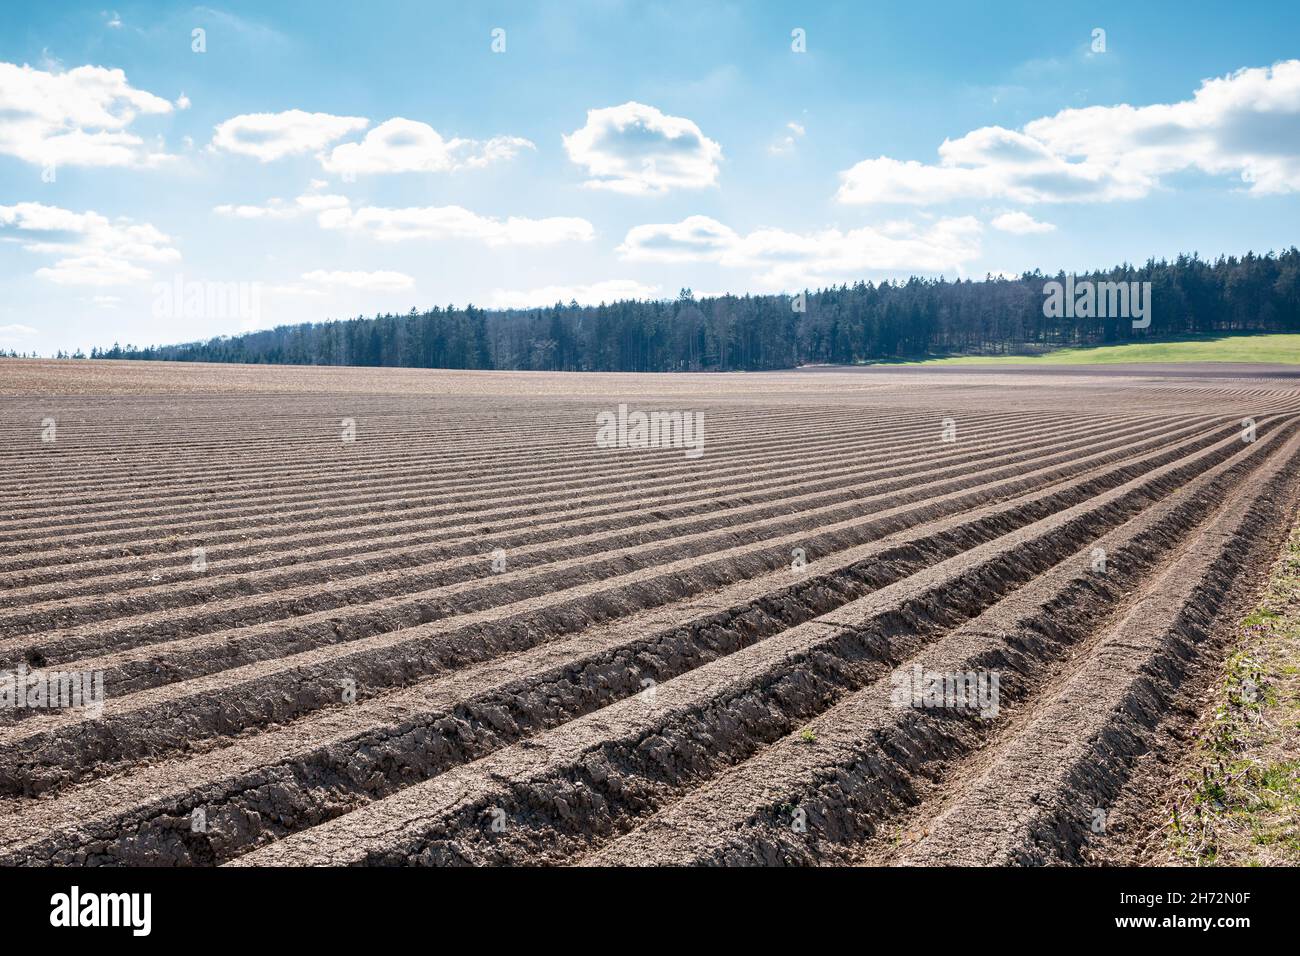 Big brown fields of fertile soil and green forest in the background Stock Photo